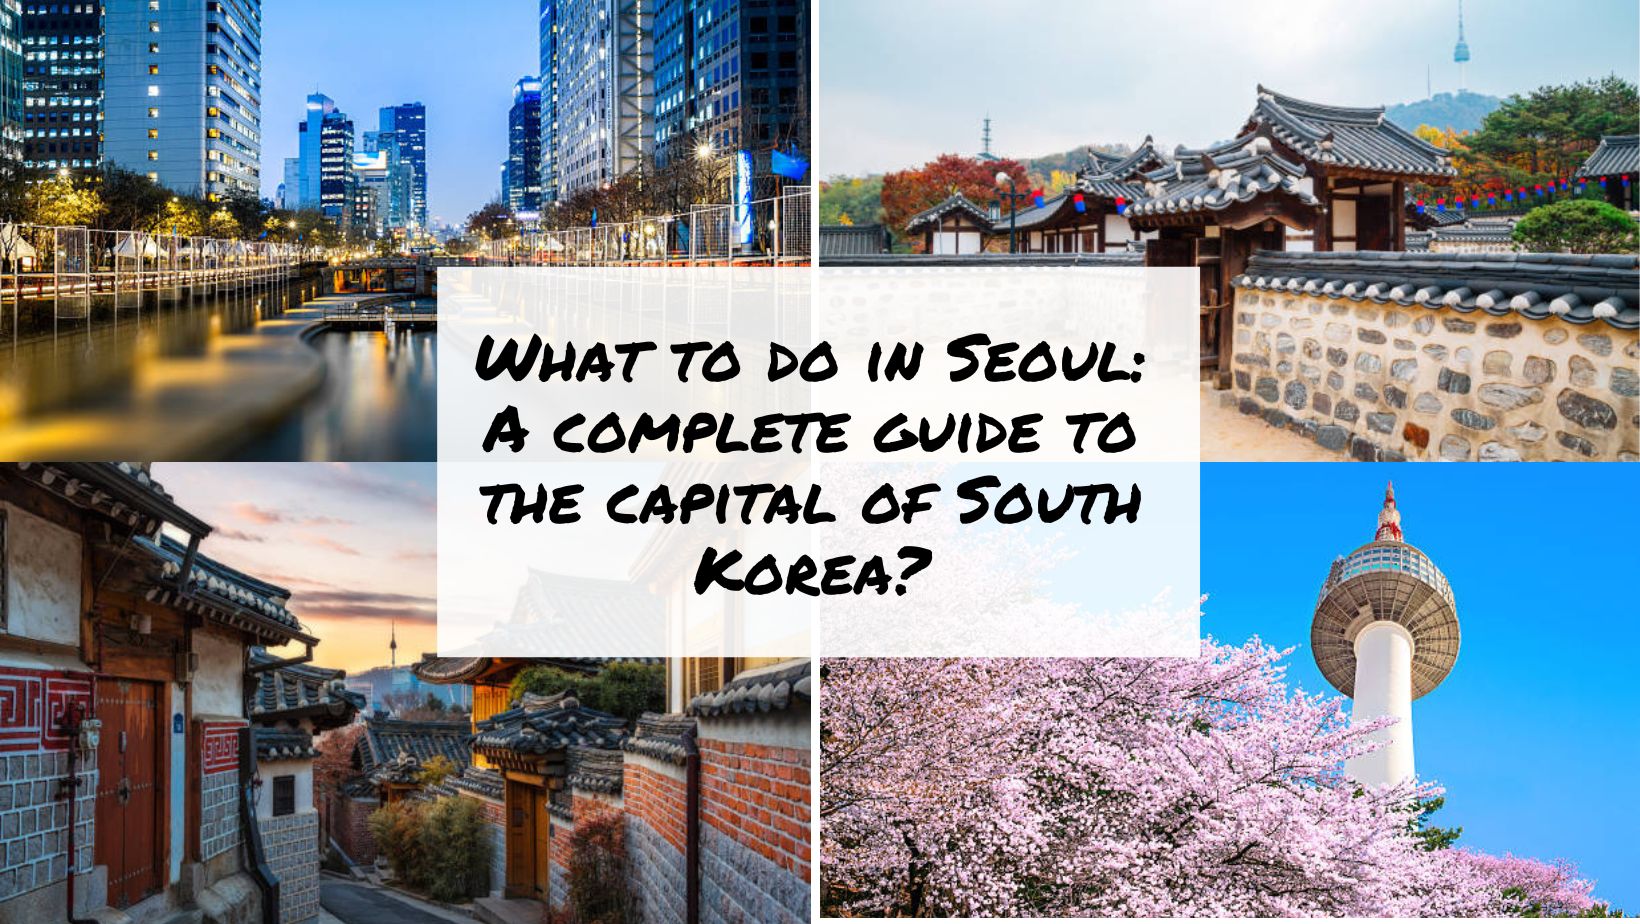 What to do in Seoul A complete guide to the capital of South Korea